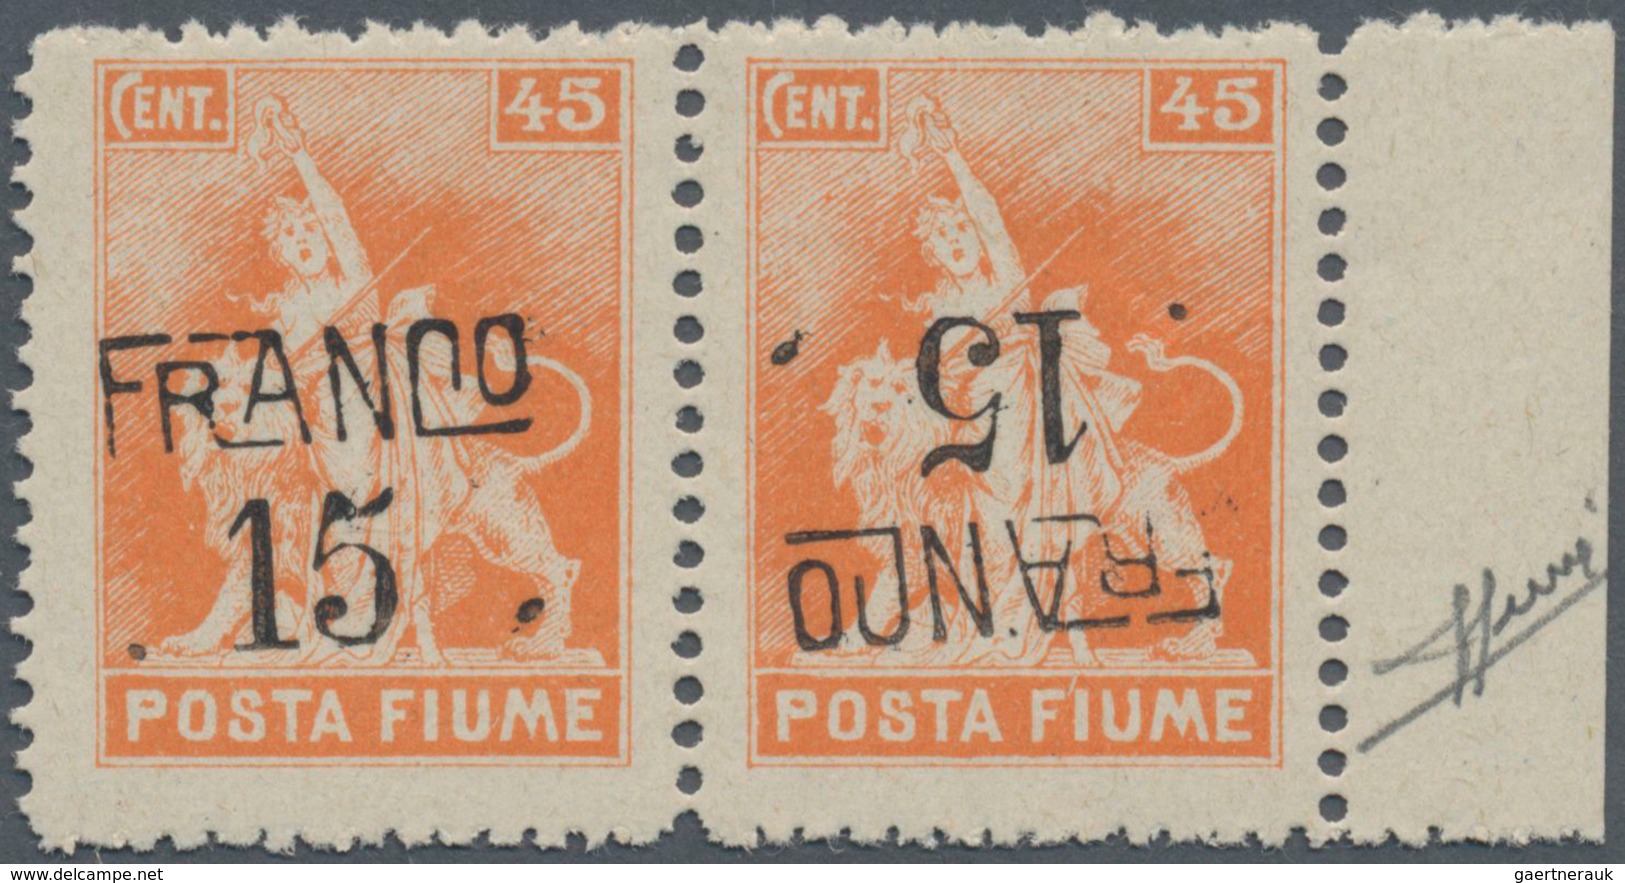 Fiume: 1919, "Franco 15" On 45 Cent. Orange Tete-beche Pair, Mint Never Hinged (Sass. 825.-) ÷ 1919, - Fiume